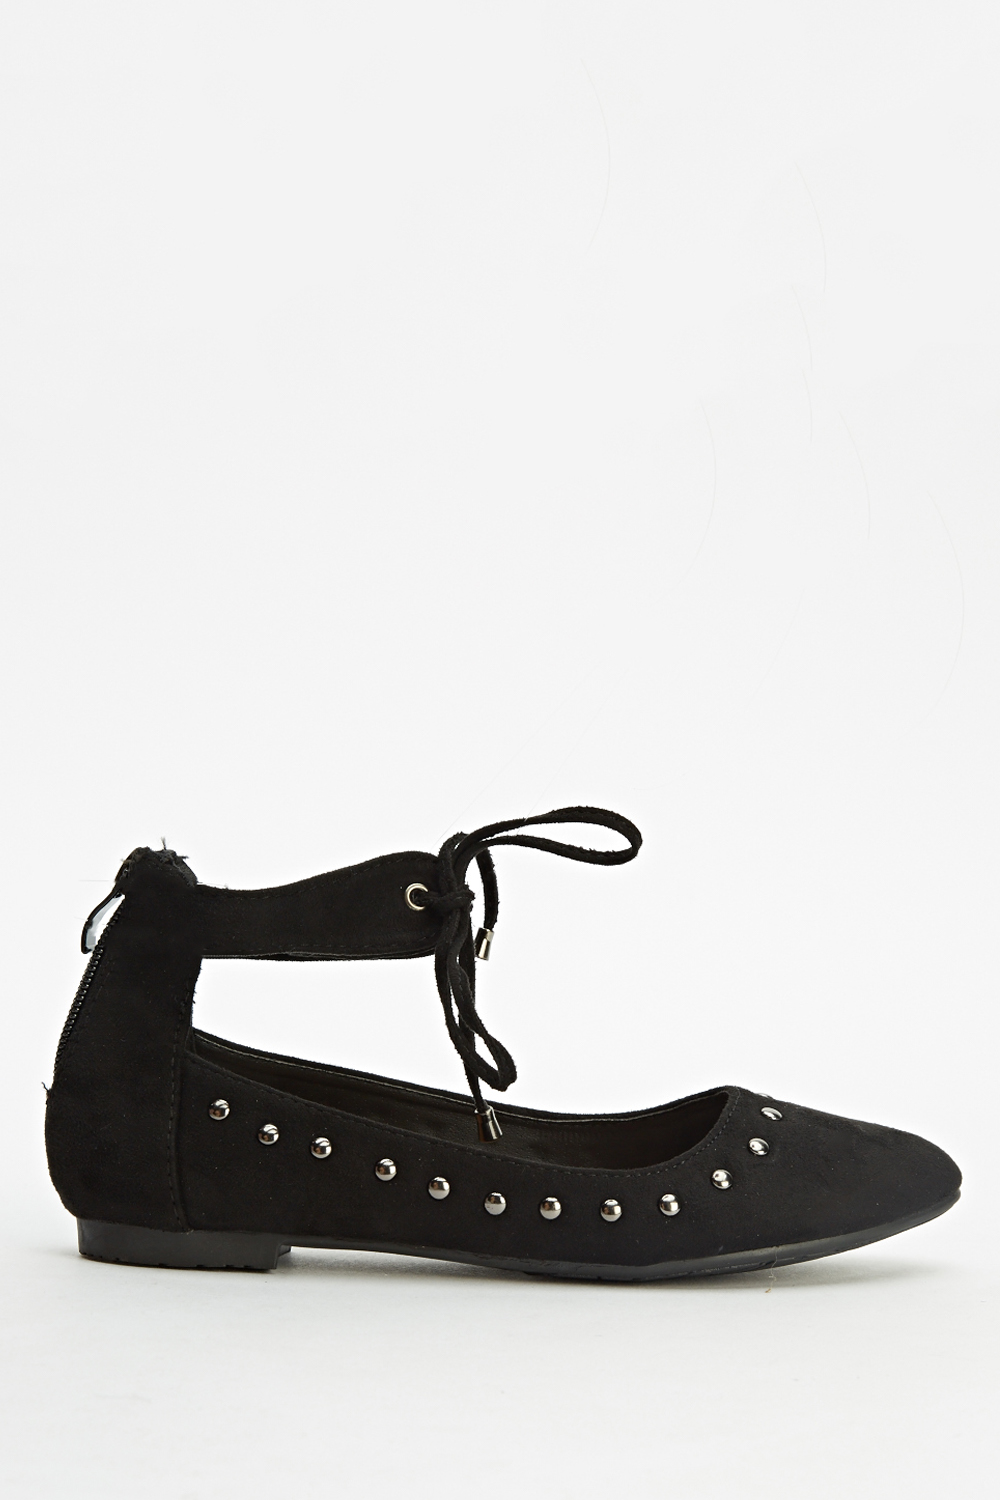 Studded Tie Up Ankle Shoes - Just $7